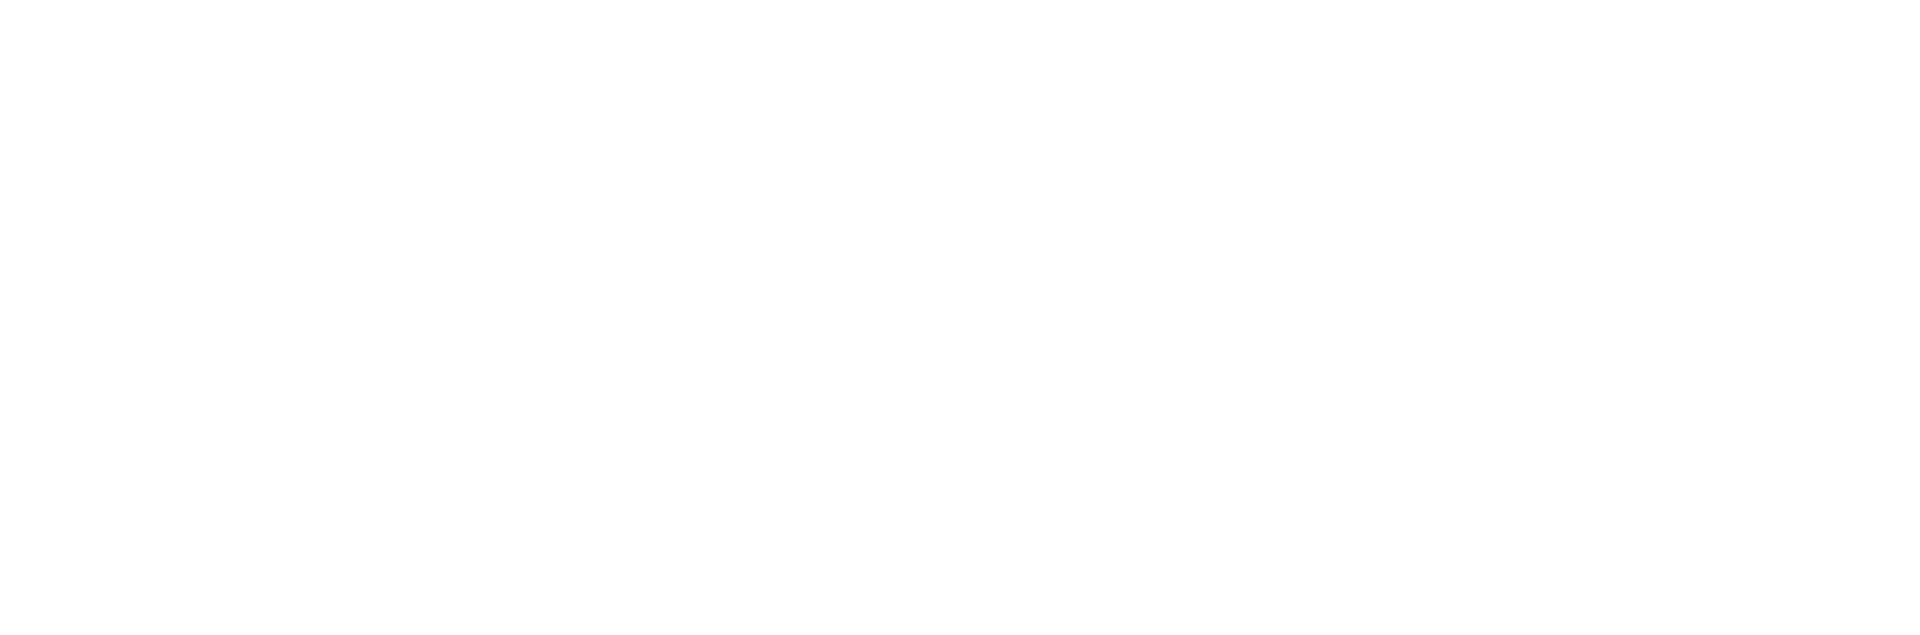 St Andrews Brewing Co.